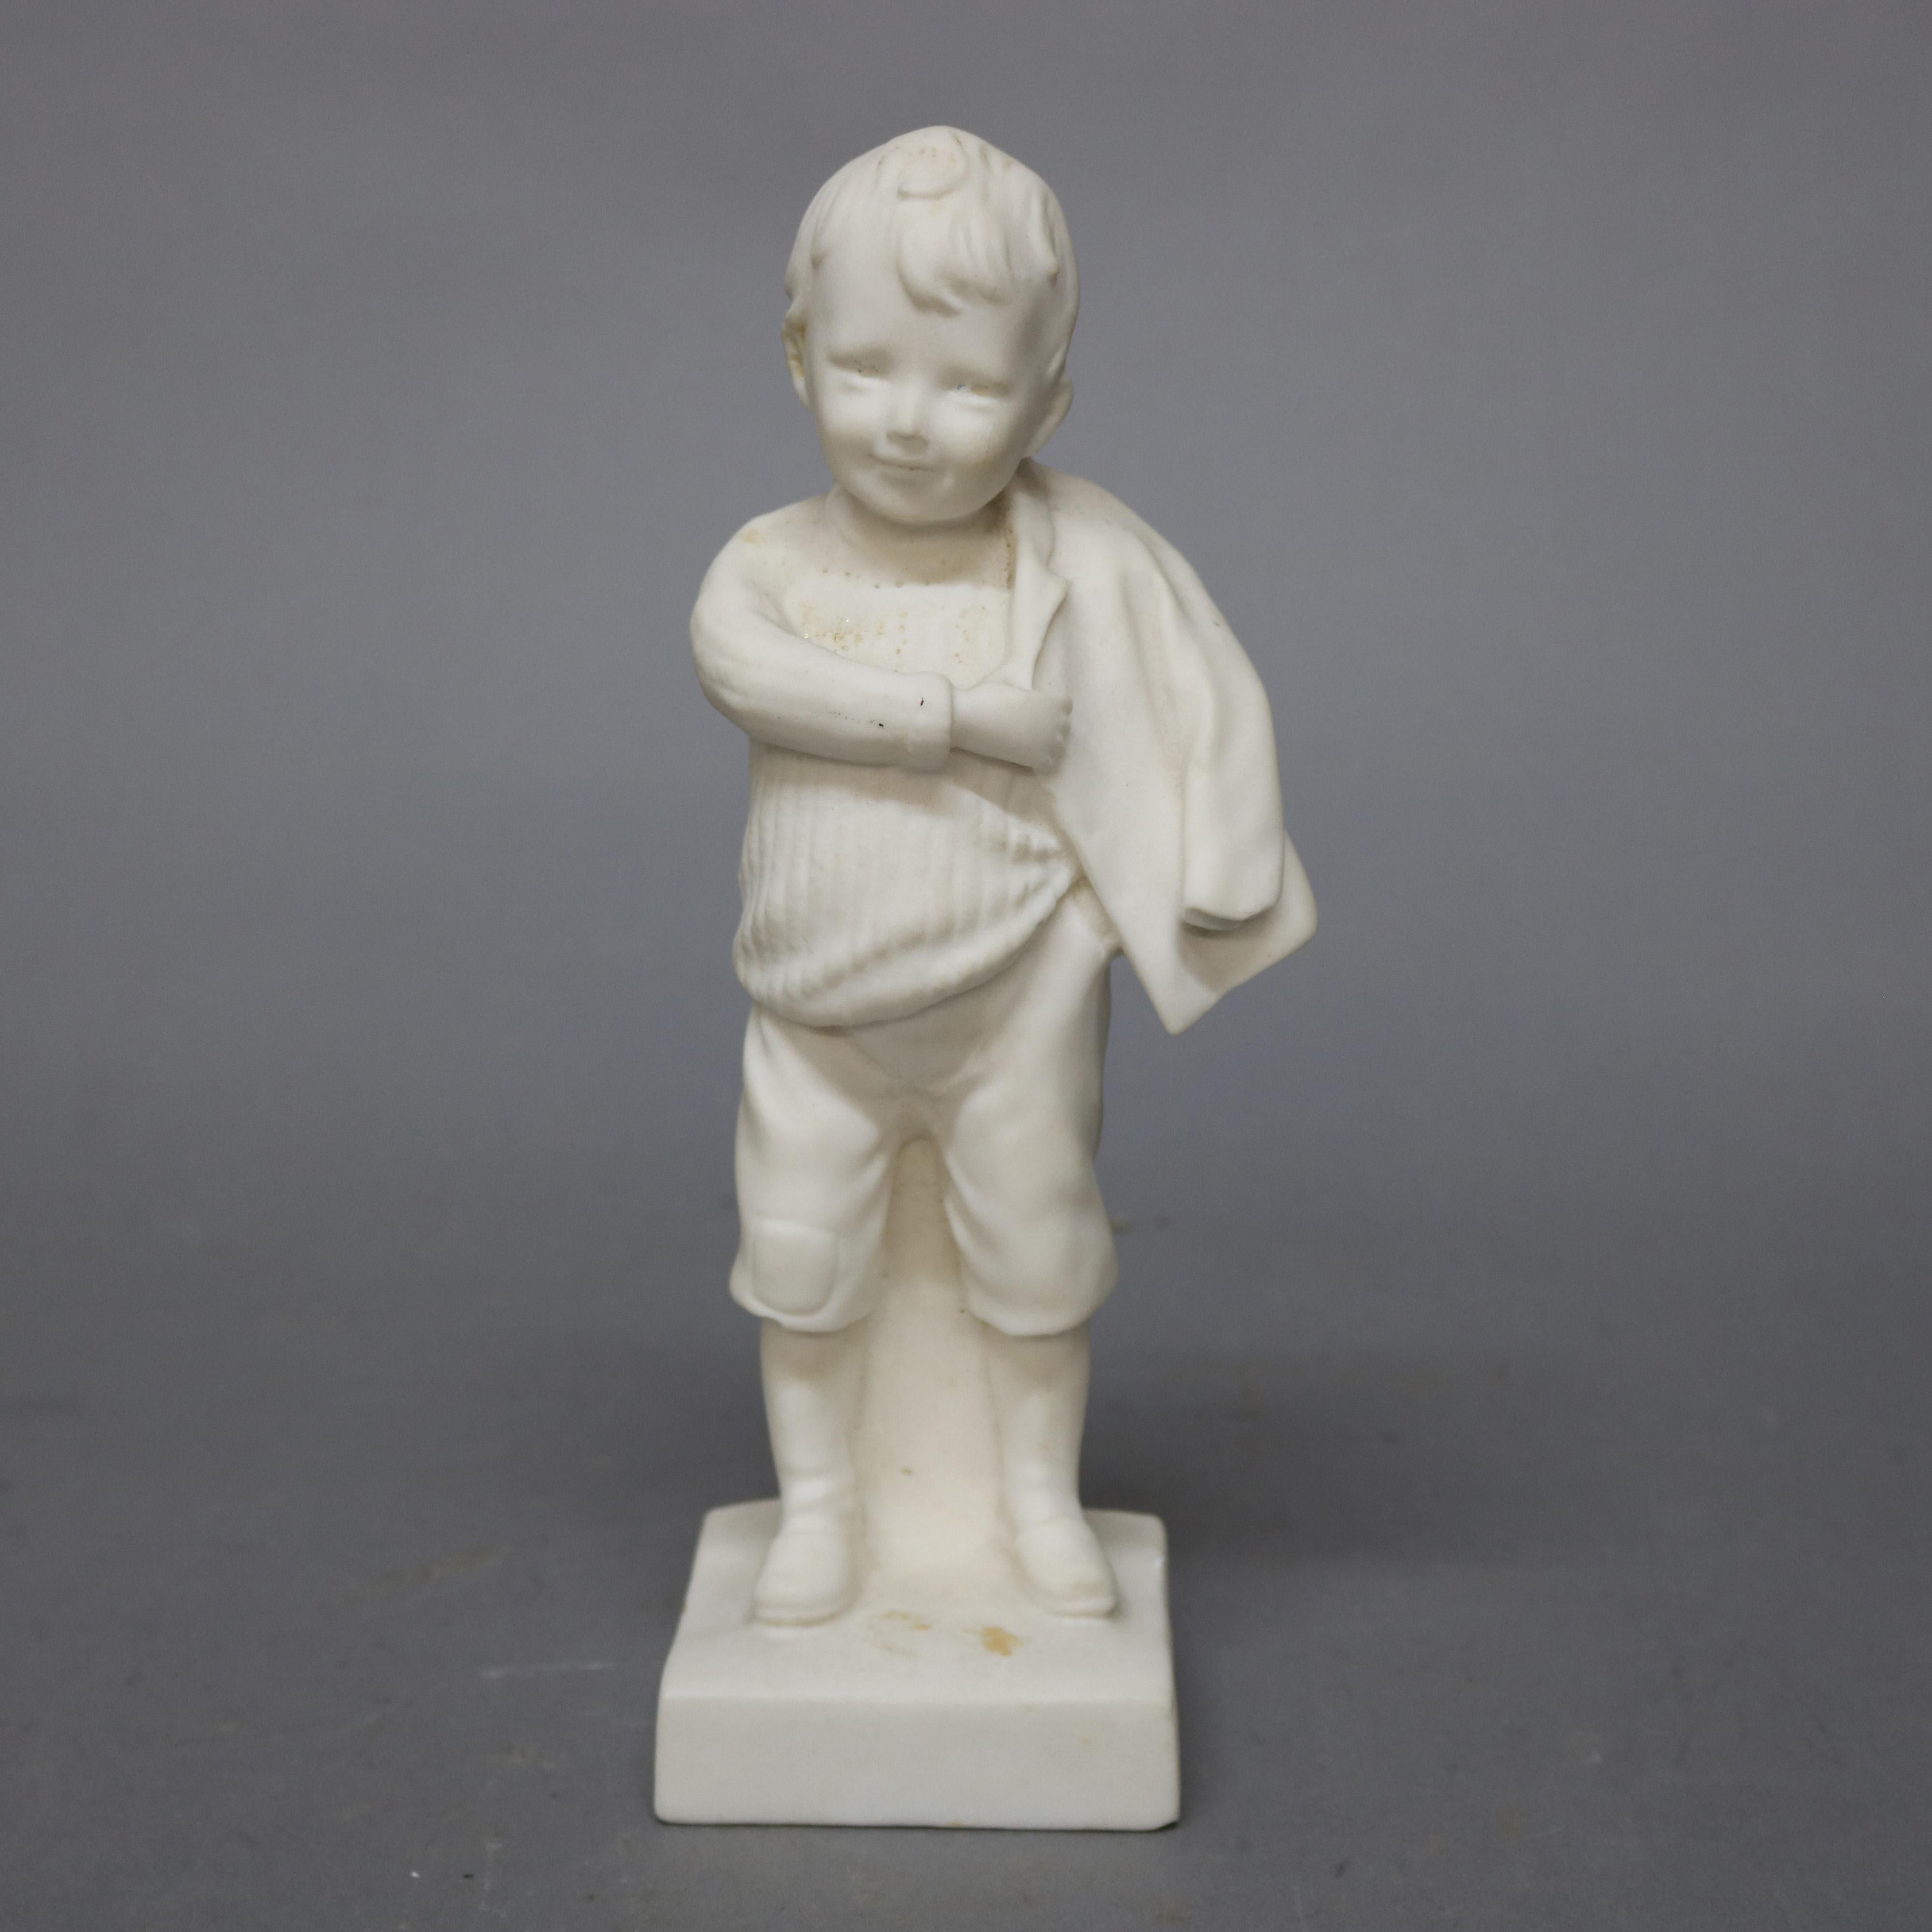 A vintage pair of figural carved Italian alabaster portrait sculptures, school boy and girl, 20th century

***DELIVERY NOTICE – Due to COVID-19 we are employing NO-CONTACT PRACTICES in the transfer of purchased items.  Additionally, for those who